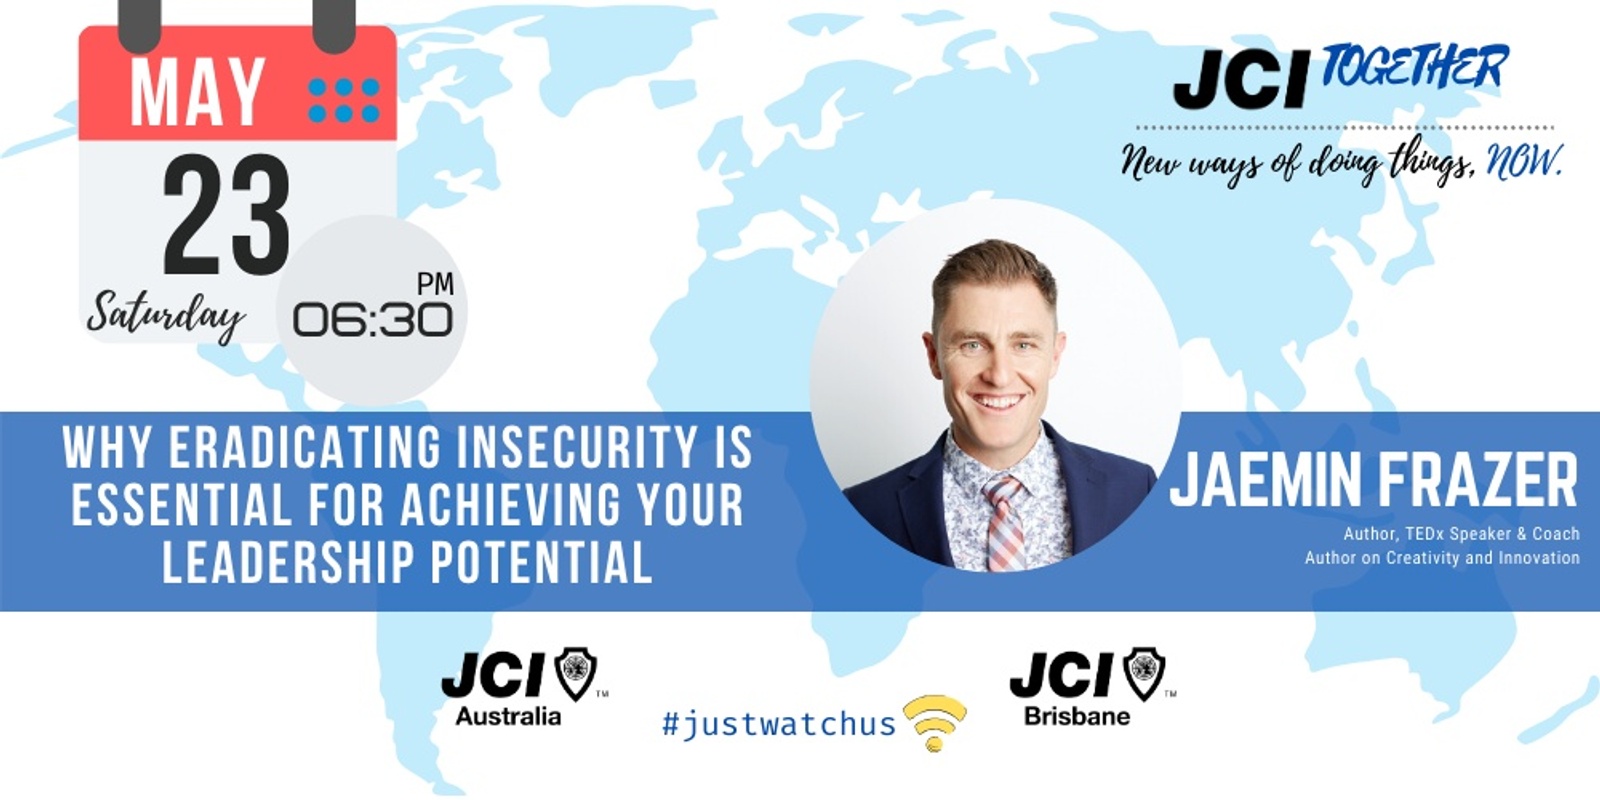 Banner image for JCI TOGETHER series: Jaemin Frazer - Why eradicating insecurity is essential for achieving your leadership potential